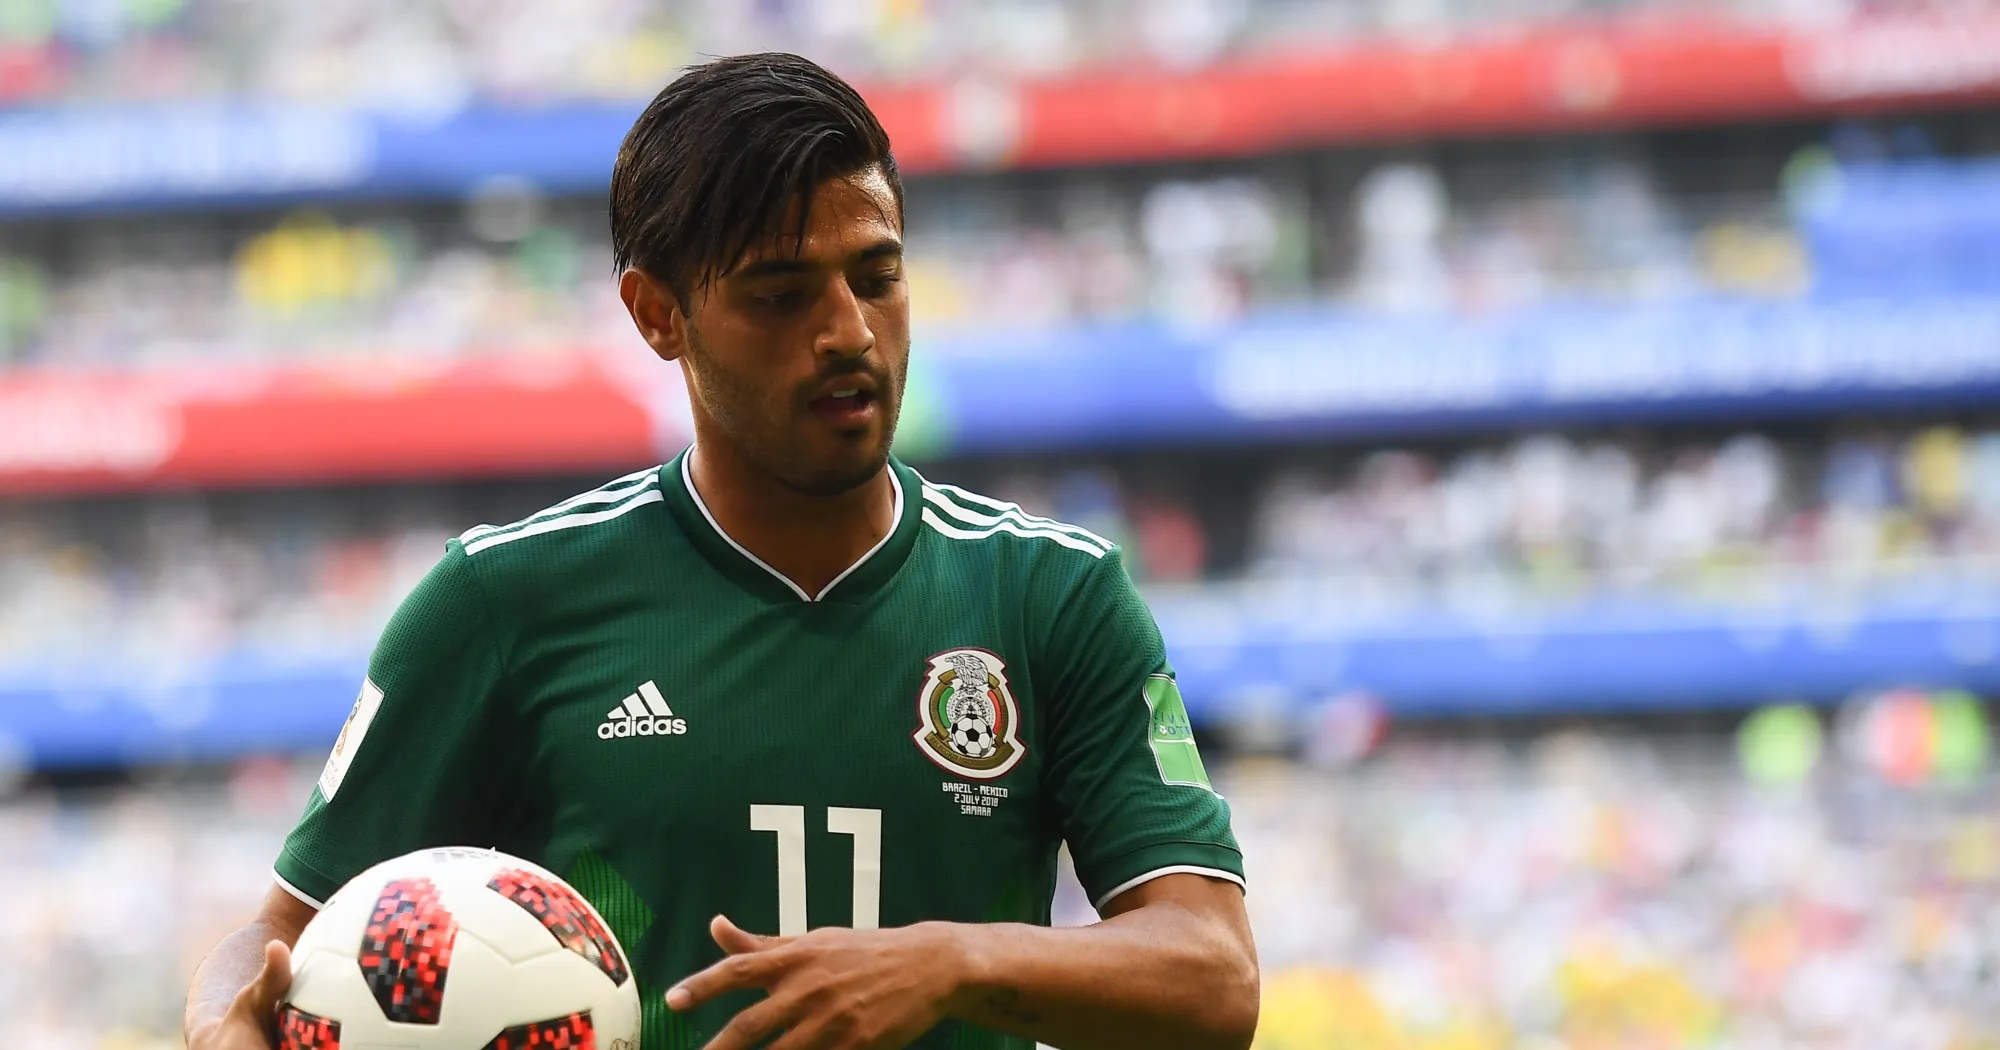 Carlos Vela warns that if there are no real changes in the Mexican team